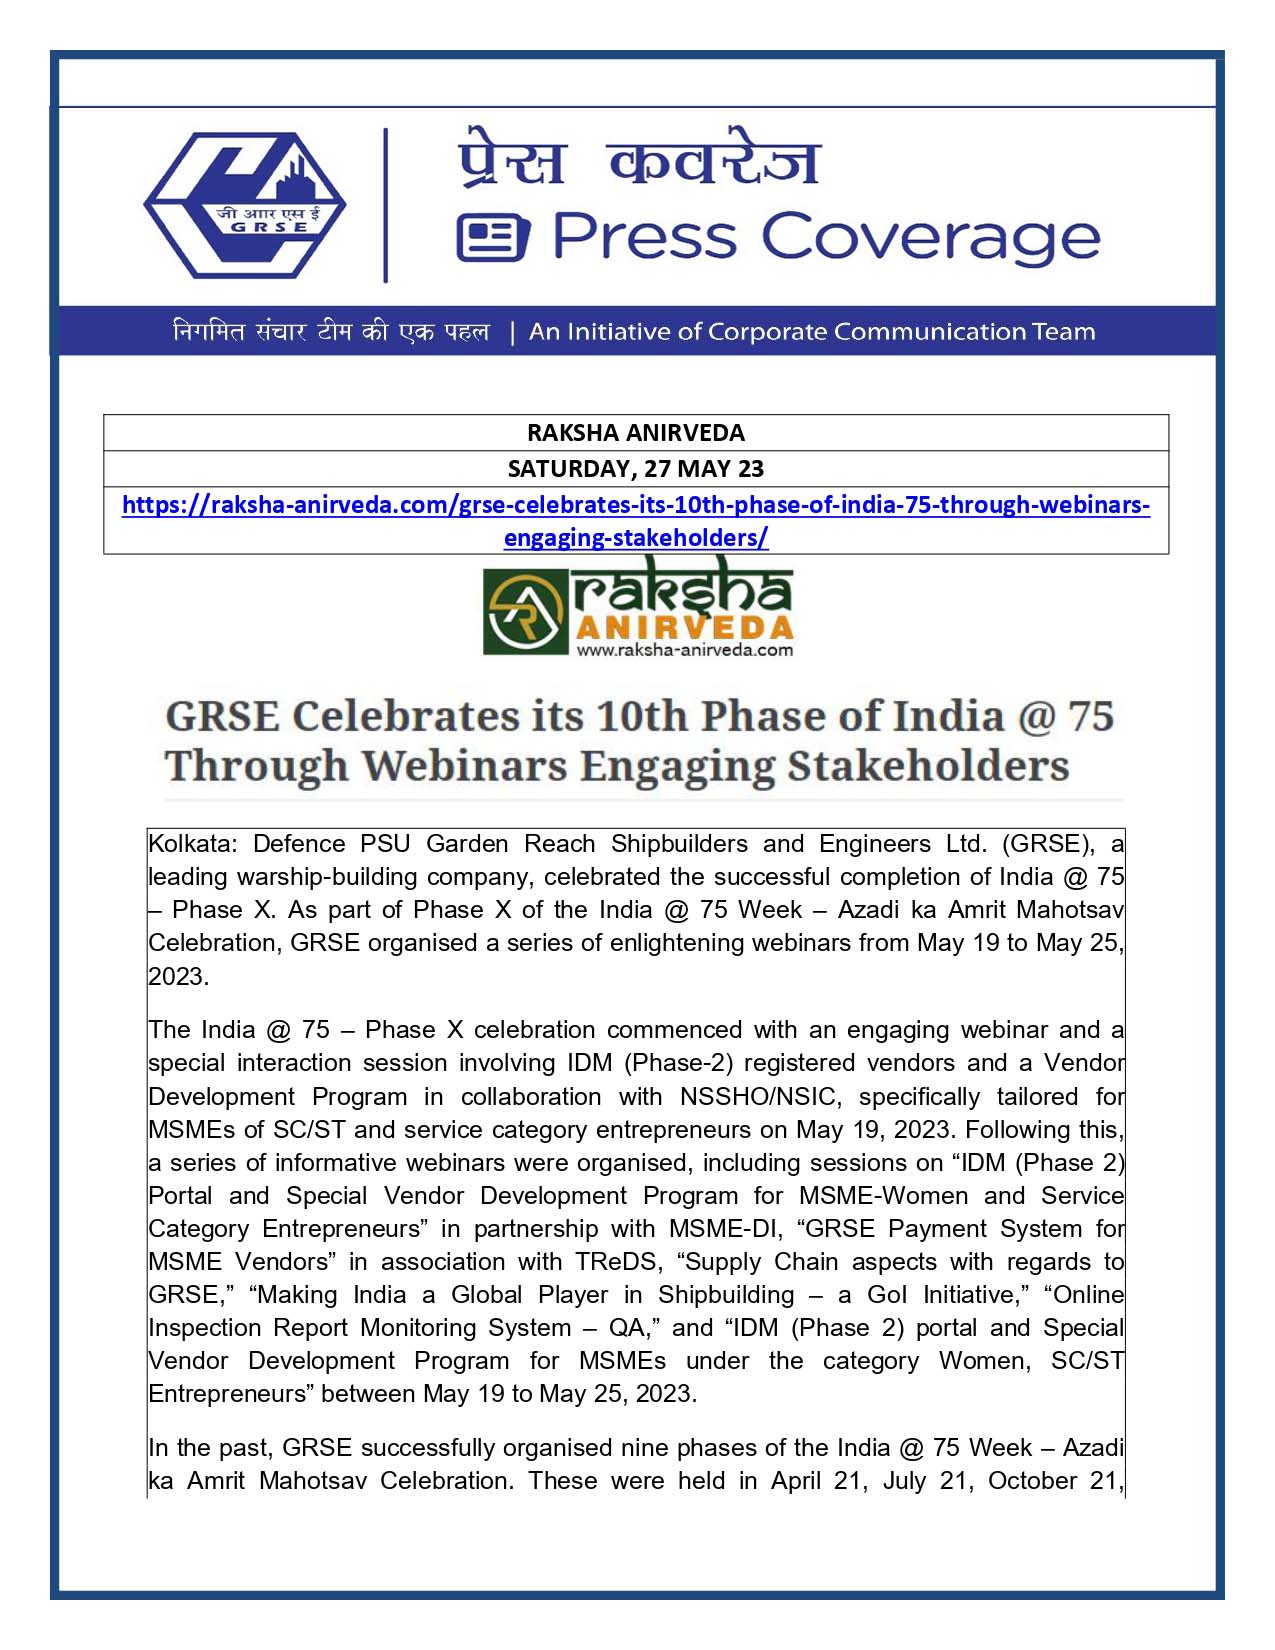 GRSE Celebrates its 10th Phase of India@75 through Webinars Engaging Stakeholders